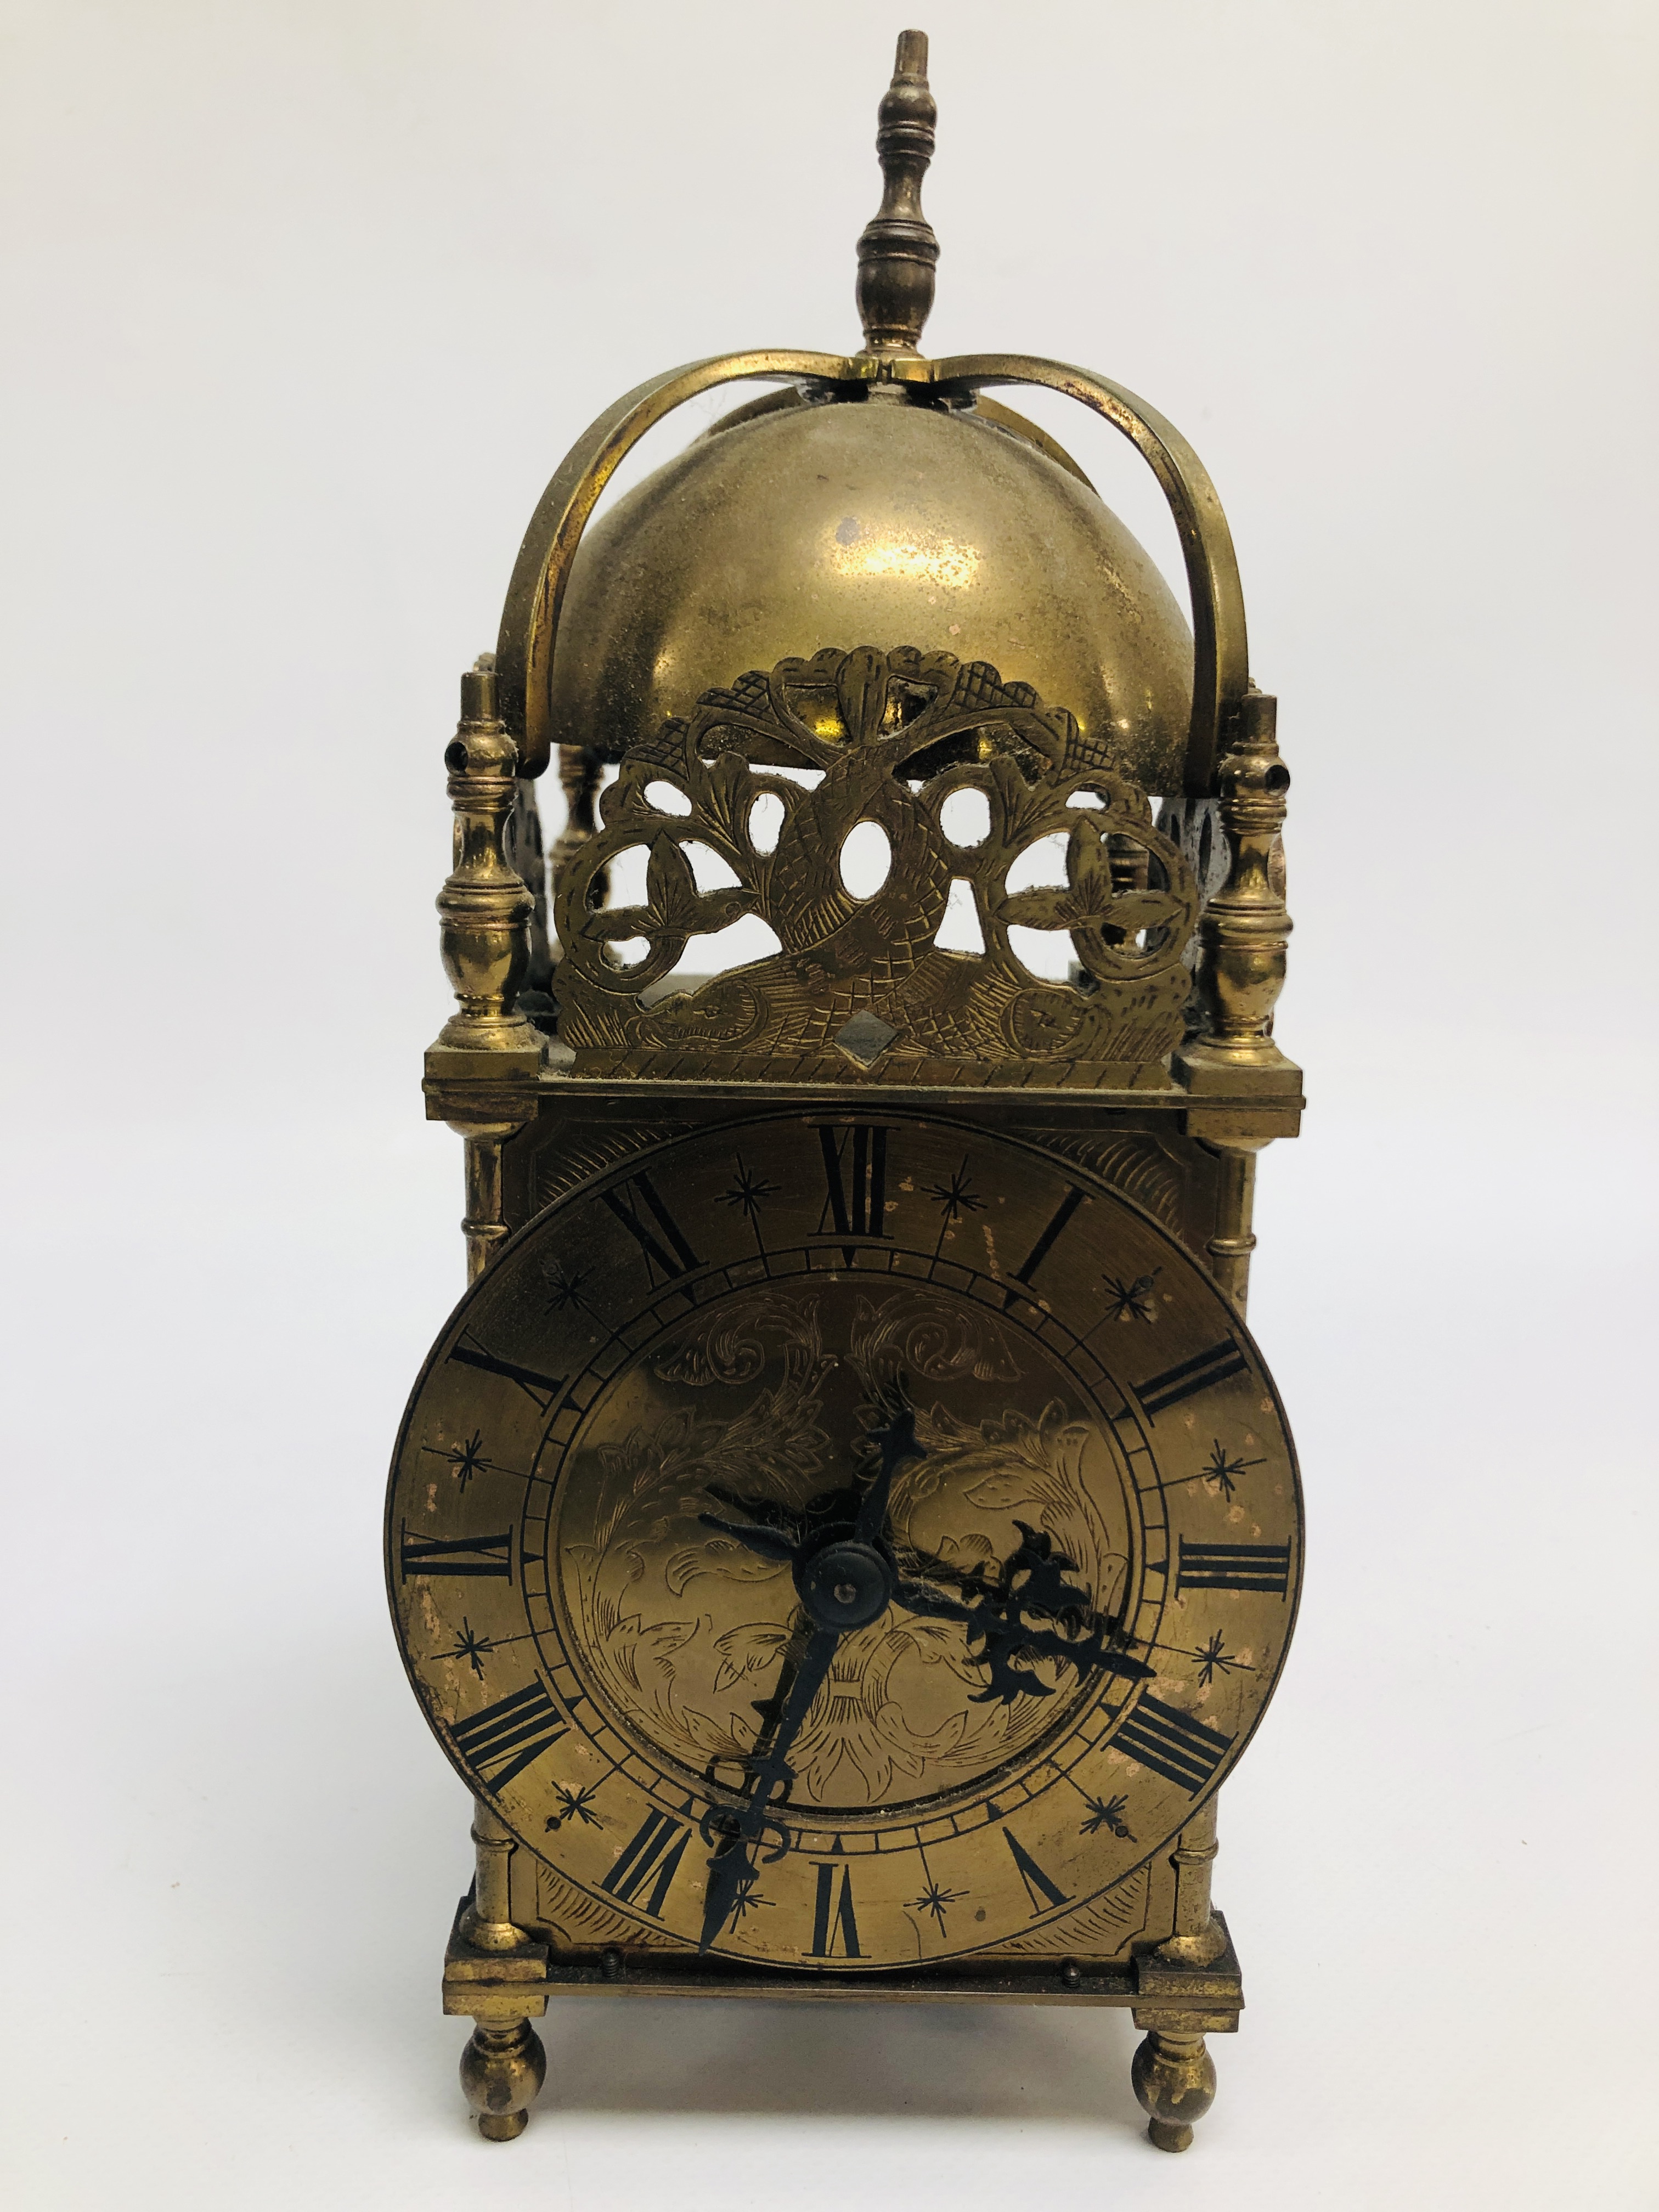 A FRENCH CARRIAGE CLOCK, THE FACE BEING PLASTIC + A MANTEL CLOCK OF LANTERN FORM. - Image 6 of 12